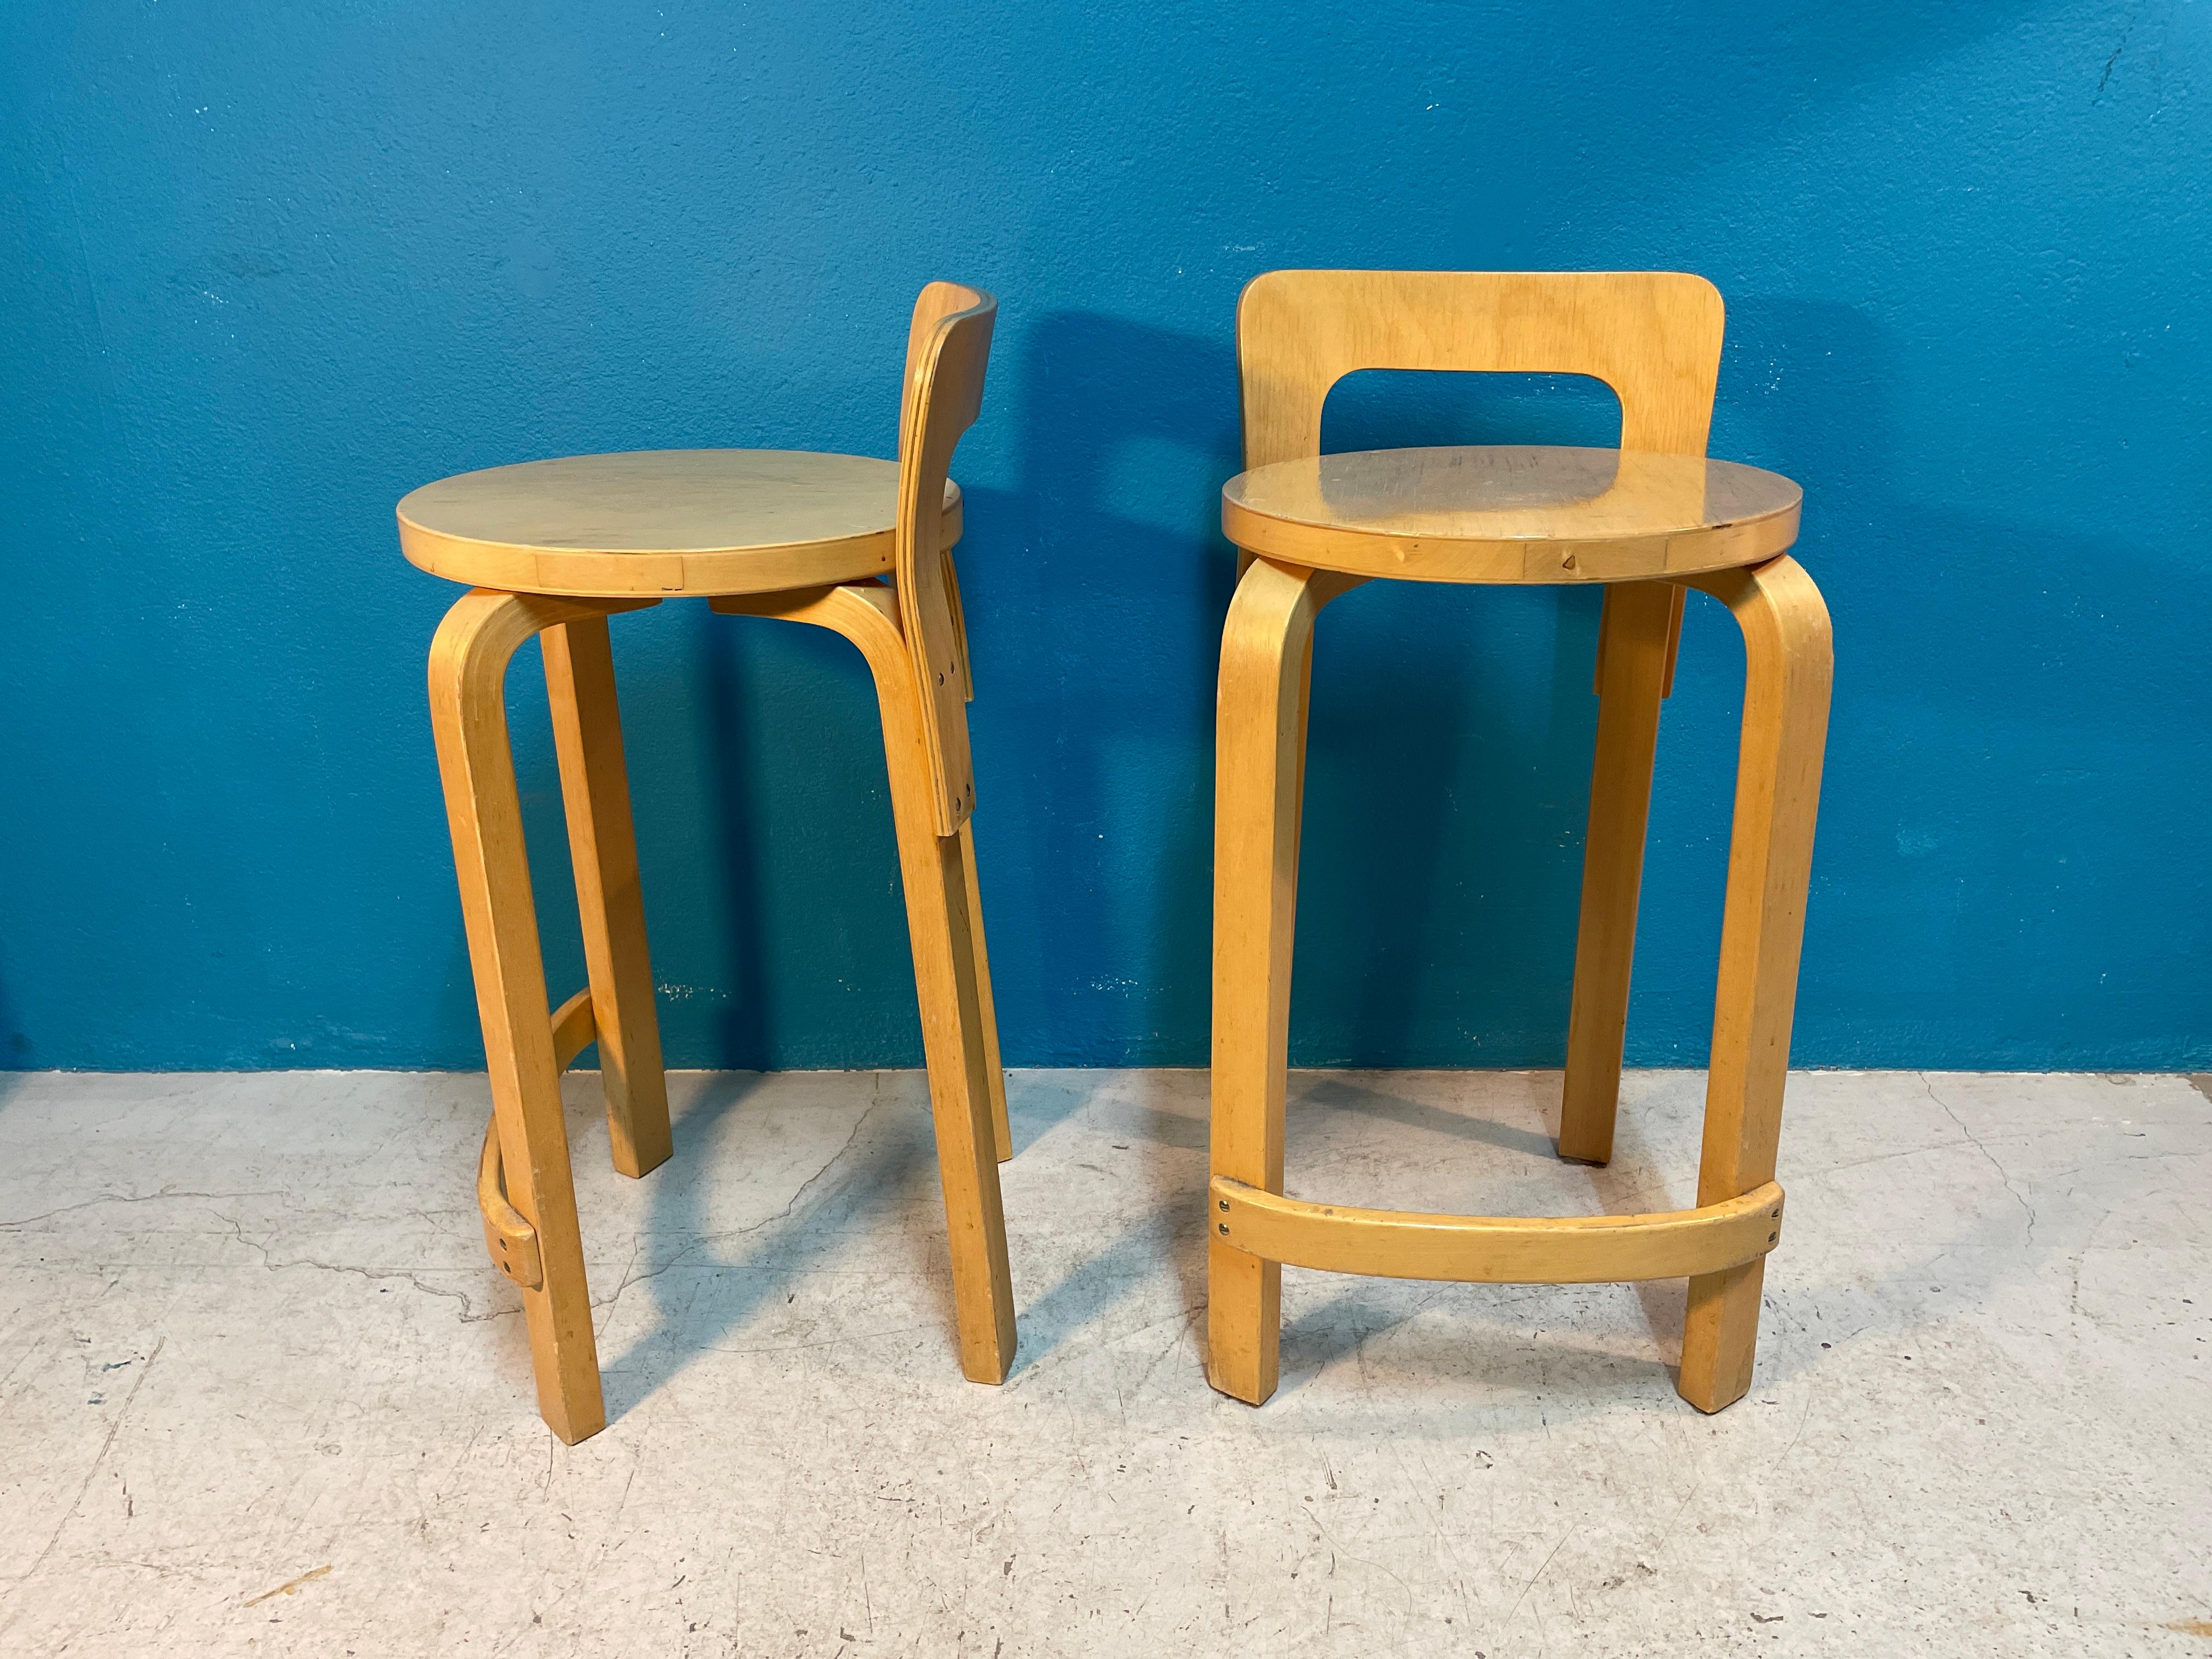 High Chair model K65 was designed by Alvar Aalto in 1935. The chair features birch legs and a low back made of bent birch plywood. Timeless Classic.

These Original Artek k65 Chairs are Made in Finland in 1970s.

Material: Birch
Width: 38 cm
Depth: